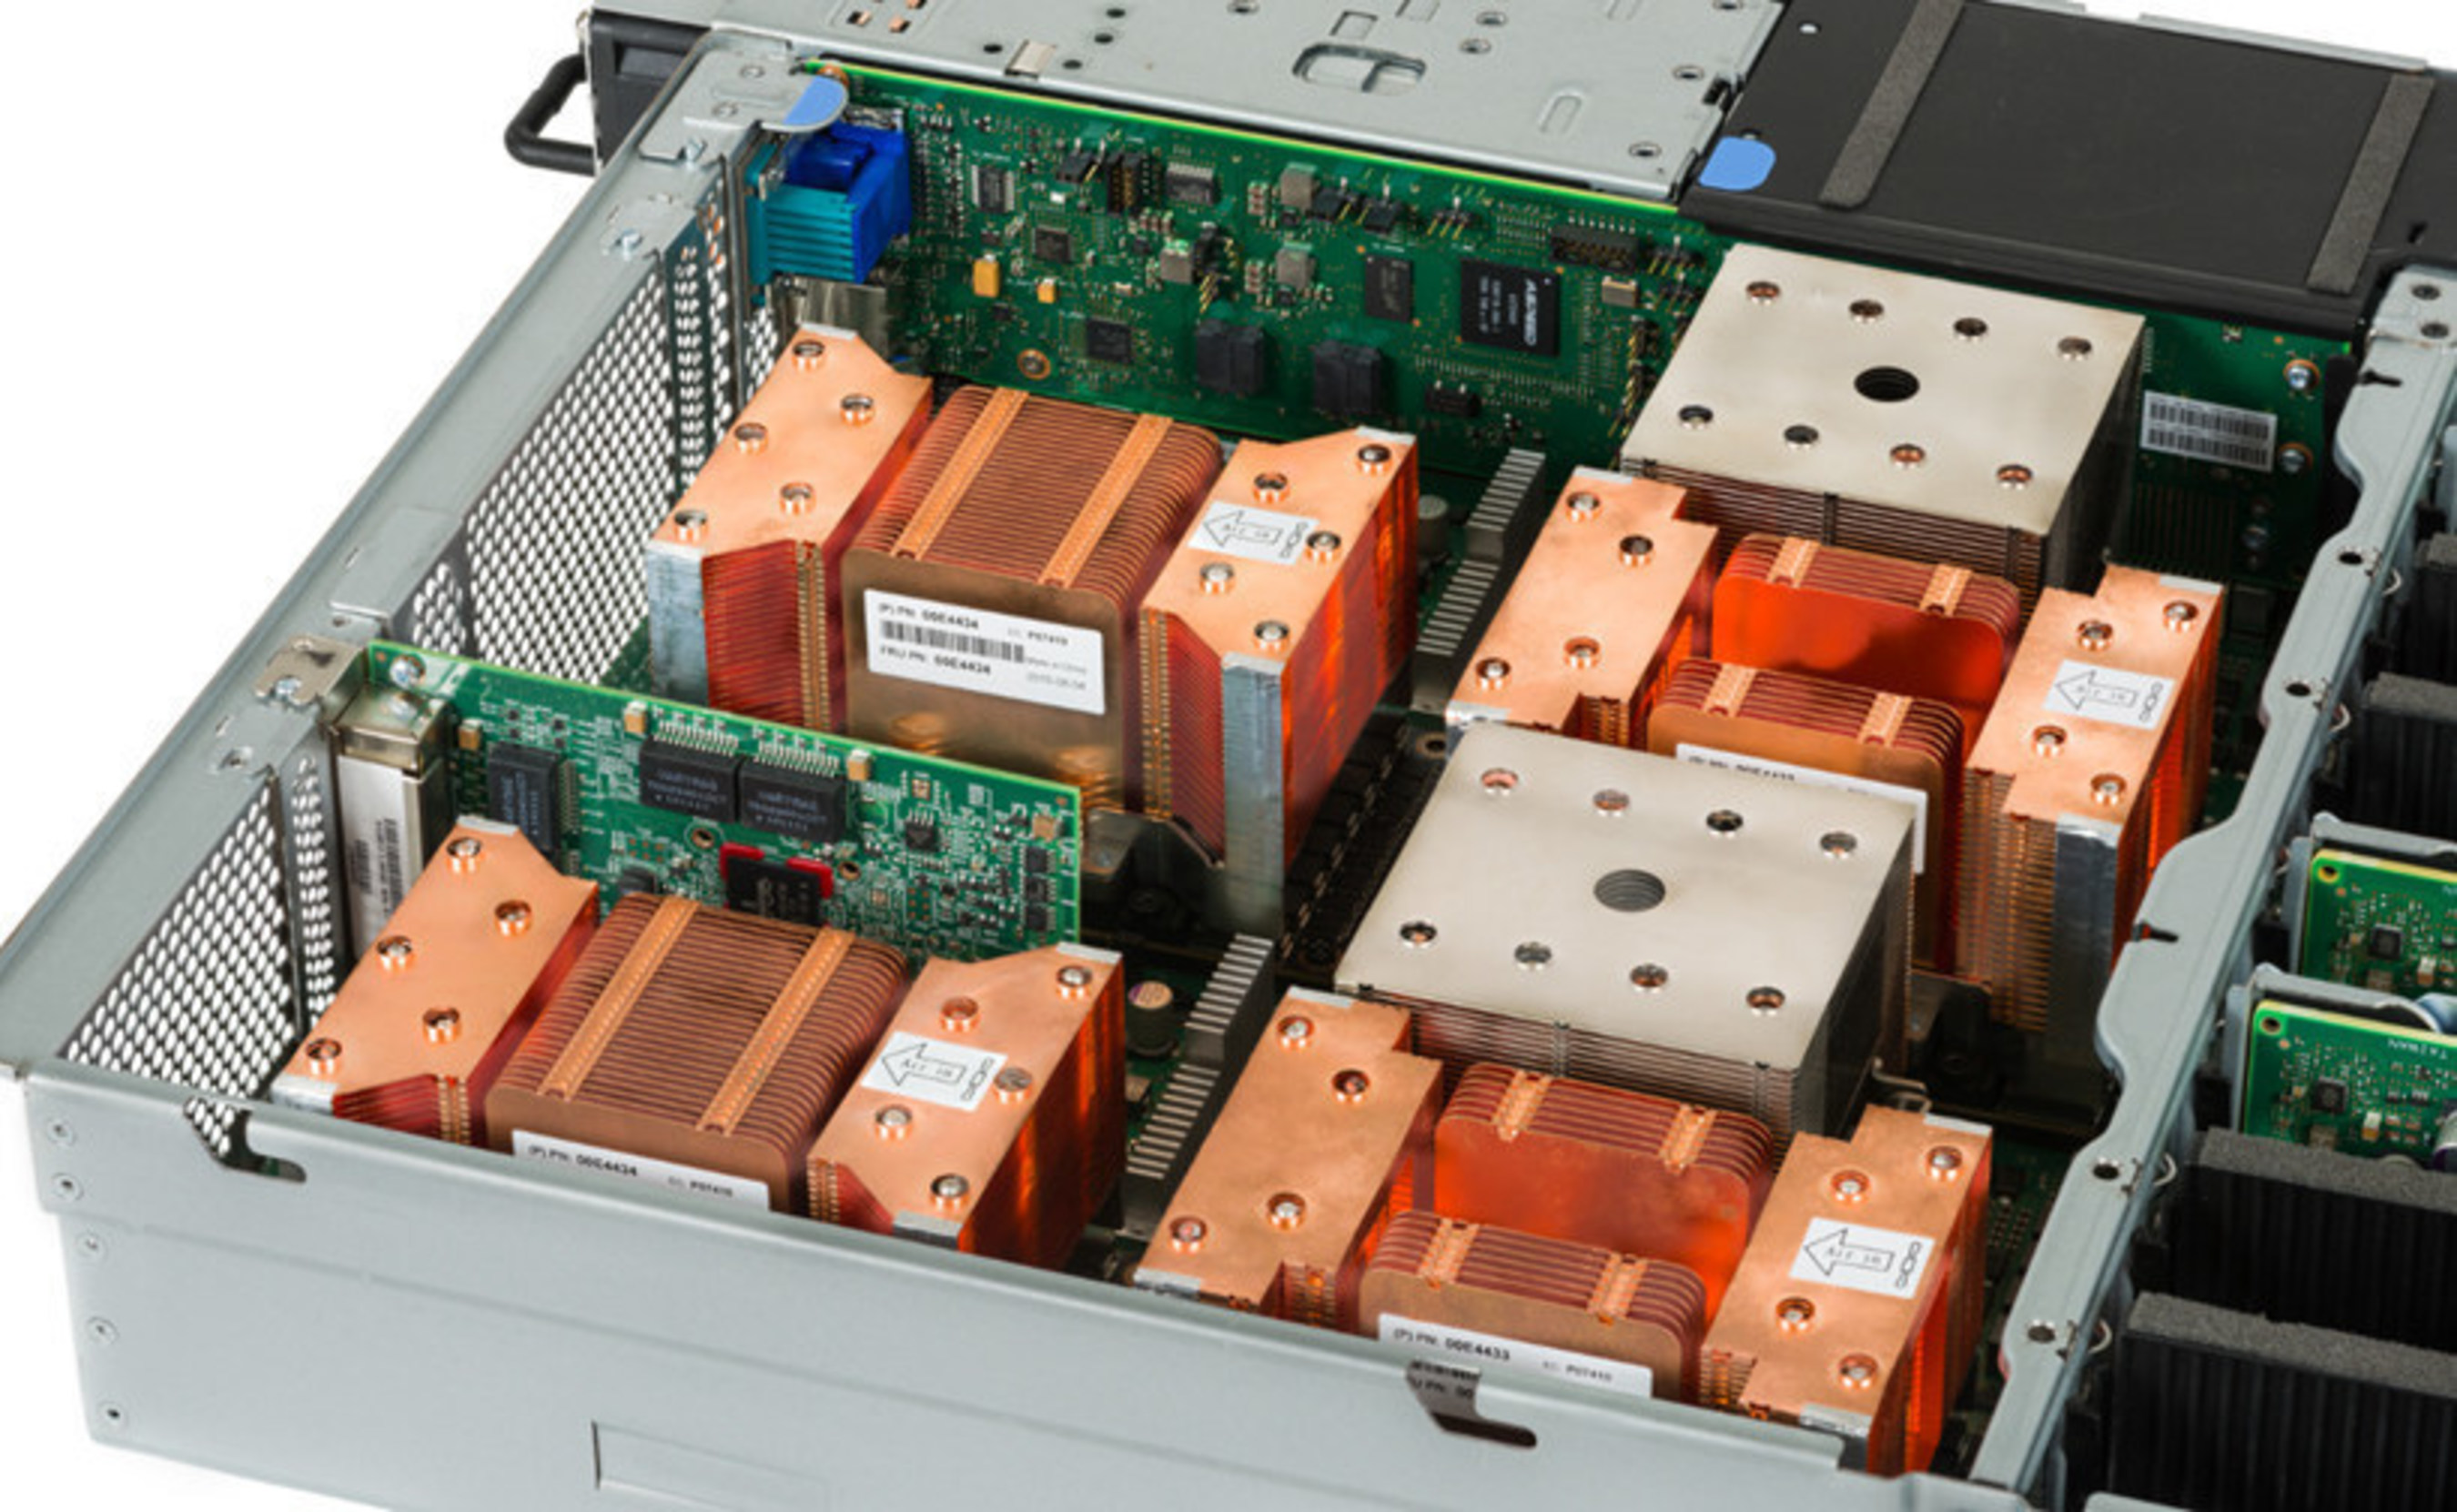 IBM's new chip and servers are designed to accelerate artificial intelligence, deep learning and advanced analytics.  With built-in NVIDIA NVLink technology, the new servers deliver higher levels of performance and greater computing efficiency than available on any x86-based server.